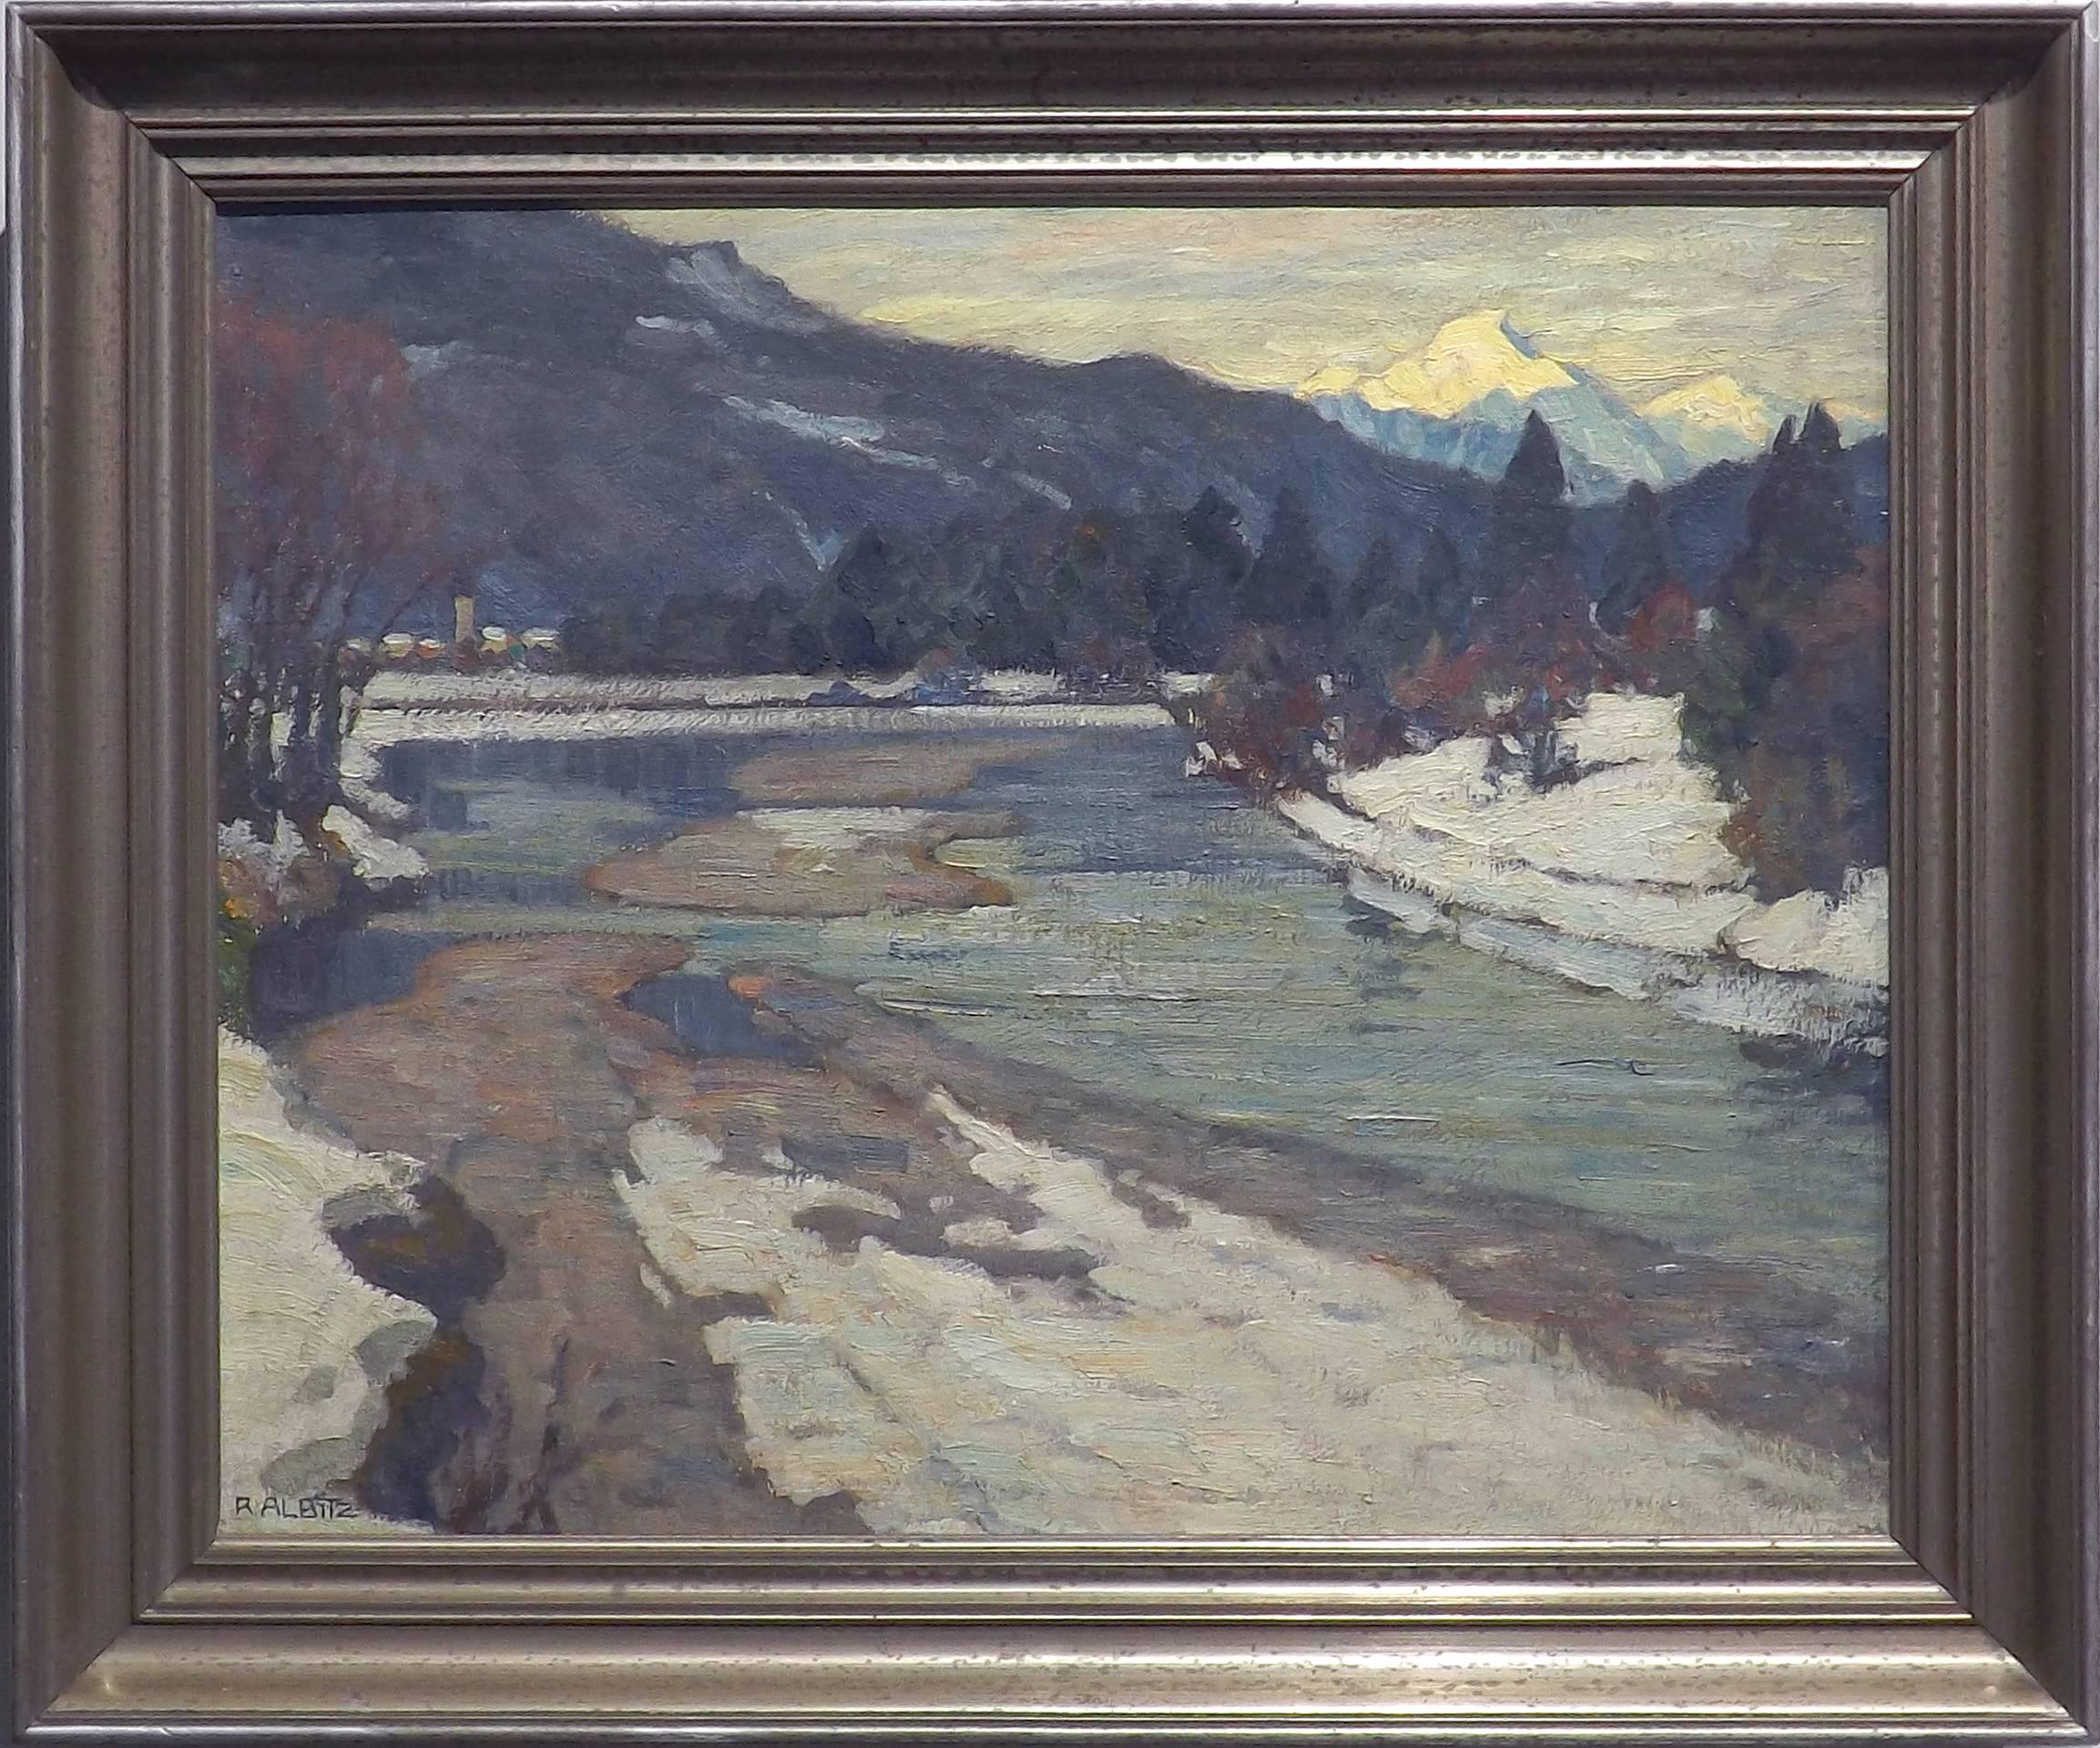 A river winds through the shadowy, winter landscape of Karwendel in this wonderful painting by German artist Richard Albitz (1876-1954). A small village is seen off in the distance, while the last light of the sun strikes a nearby Alpine